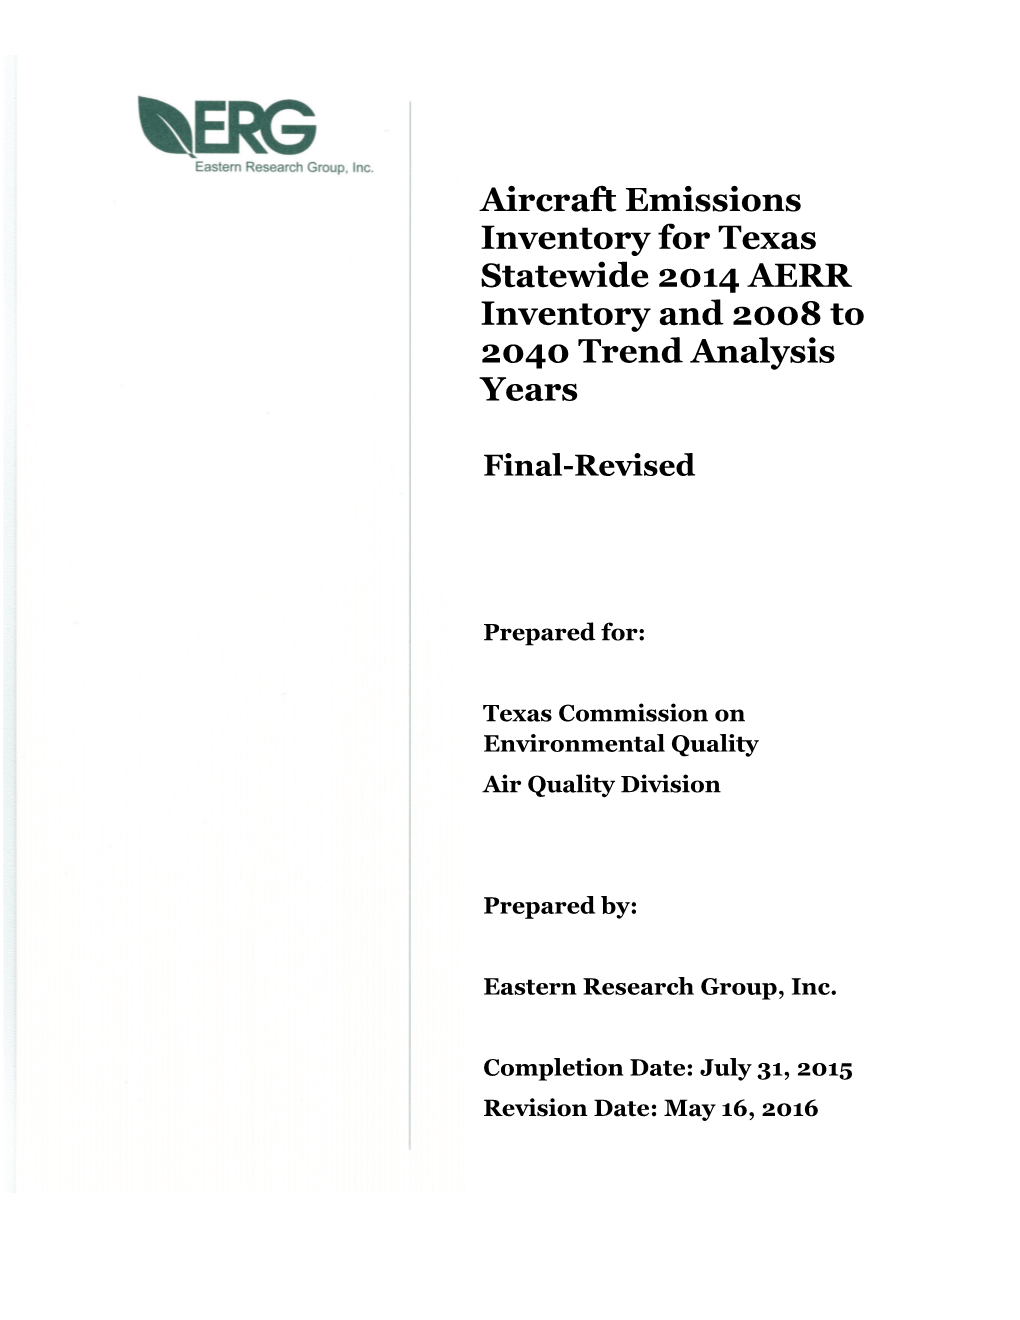 2008 to 2040 Aircraft Emisson Inventory